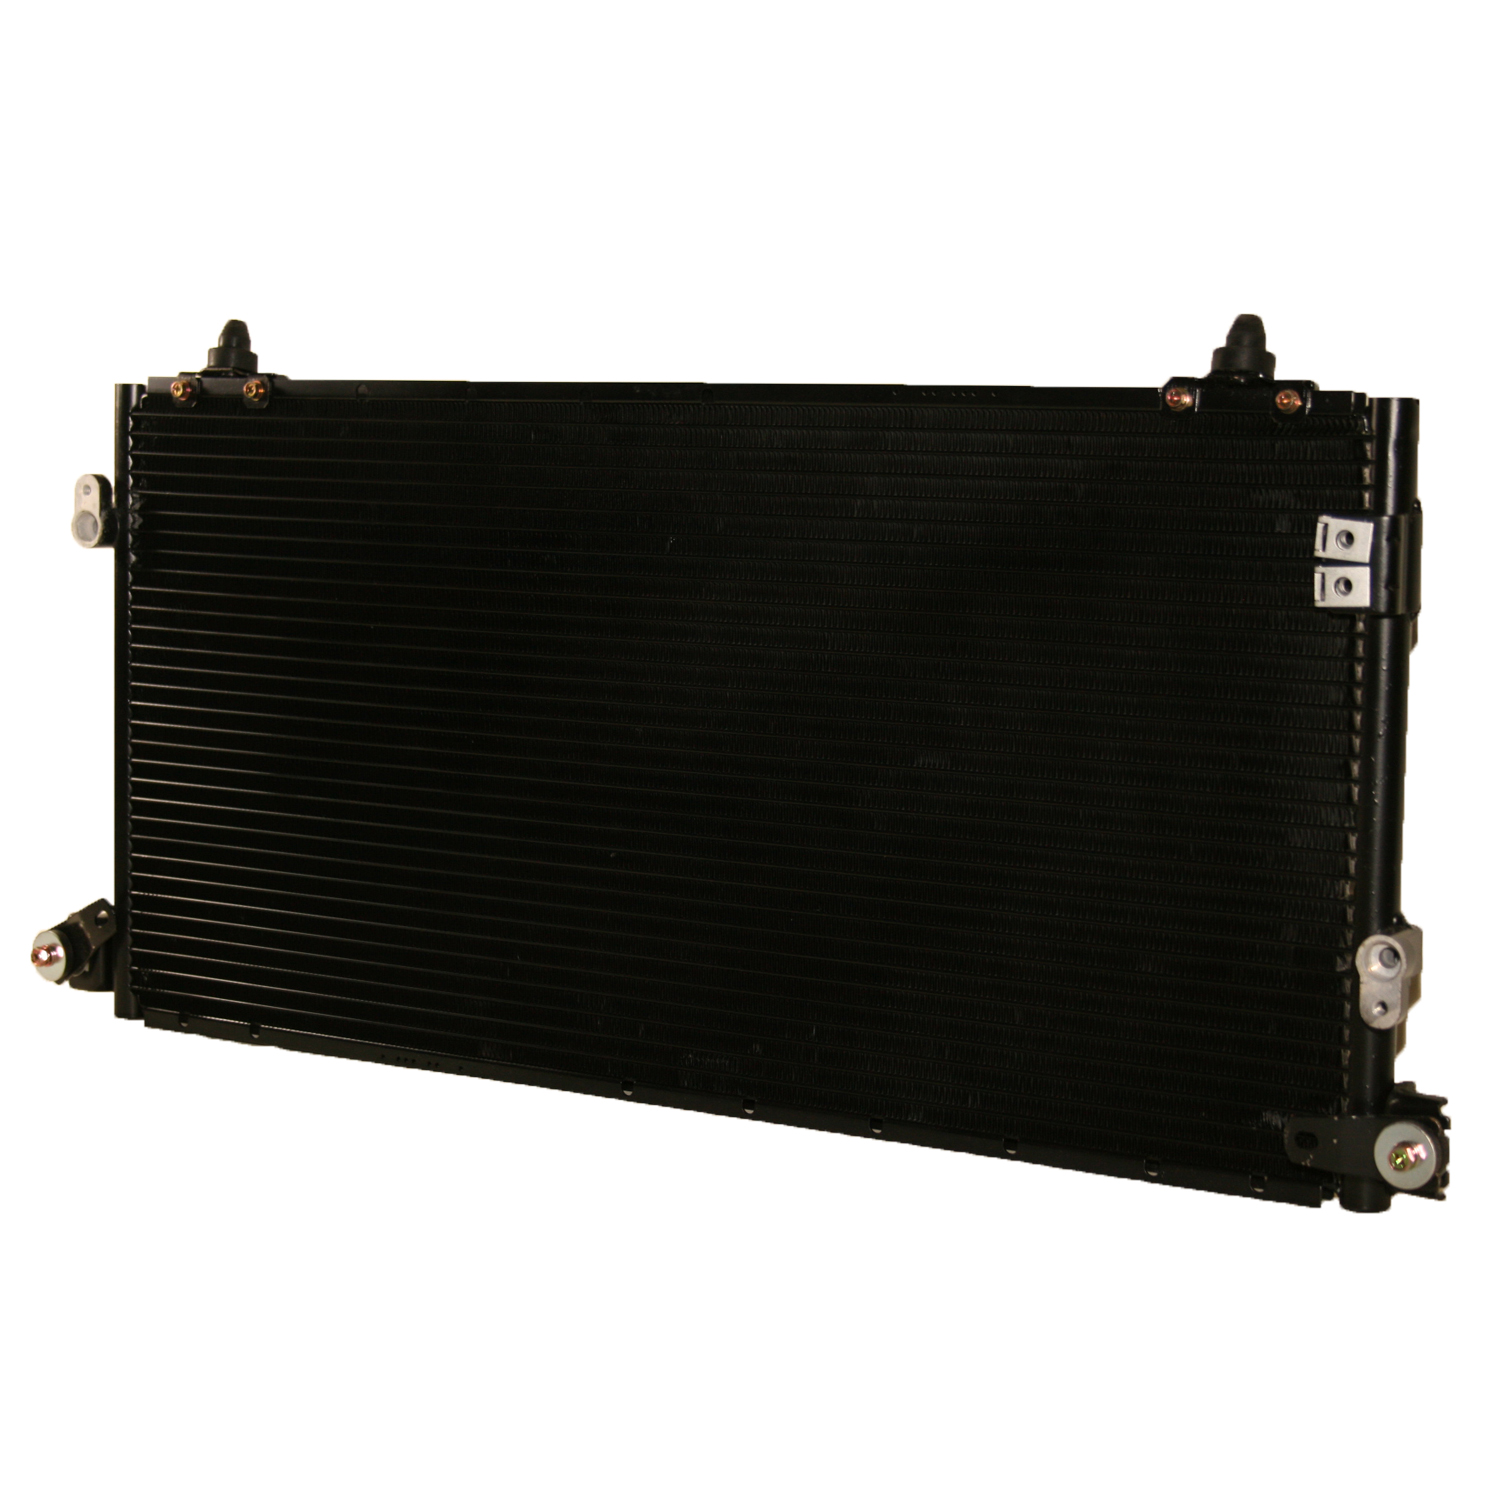 TCW Condenser 44-4963 New Product Image field_60b6a13a6e67c